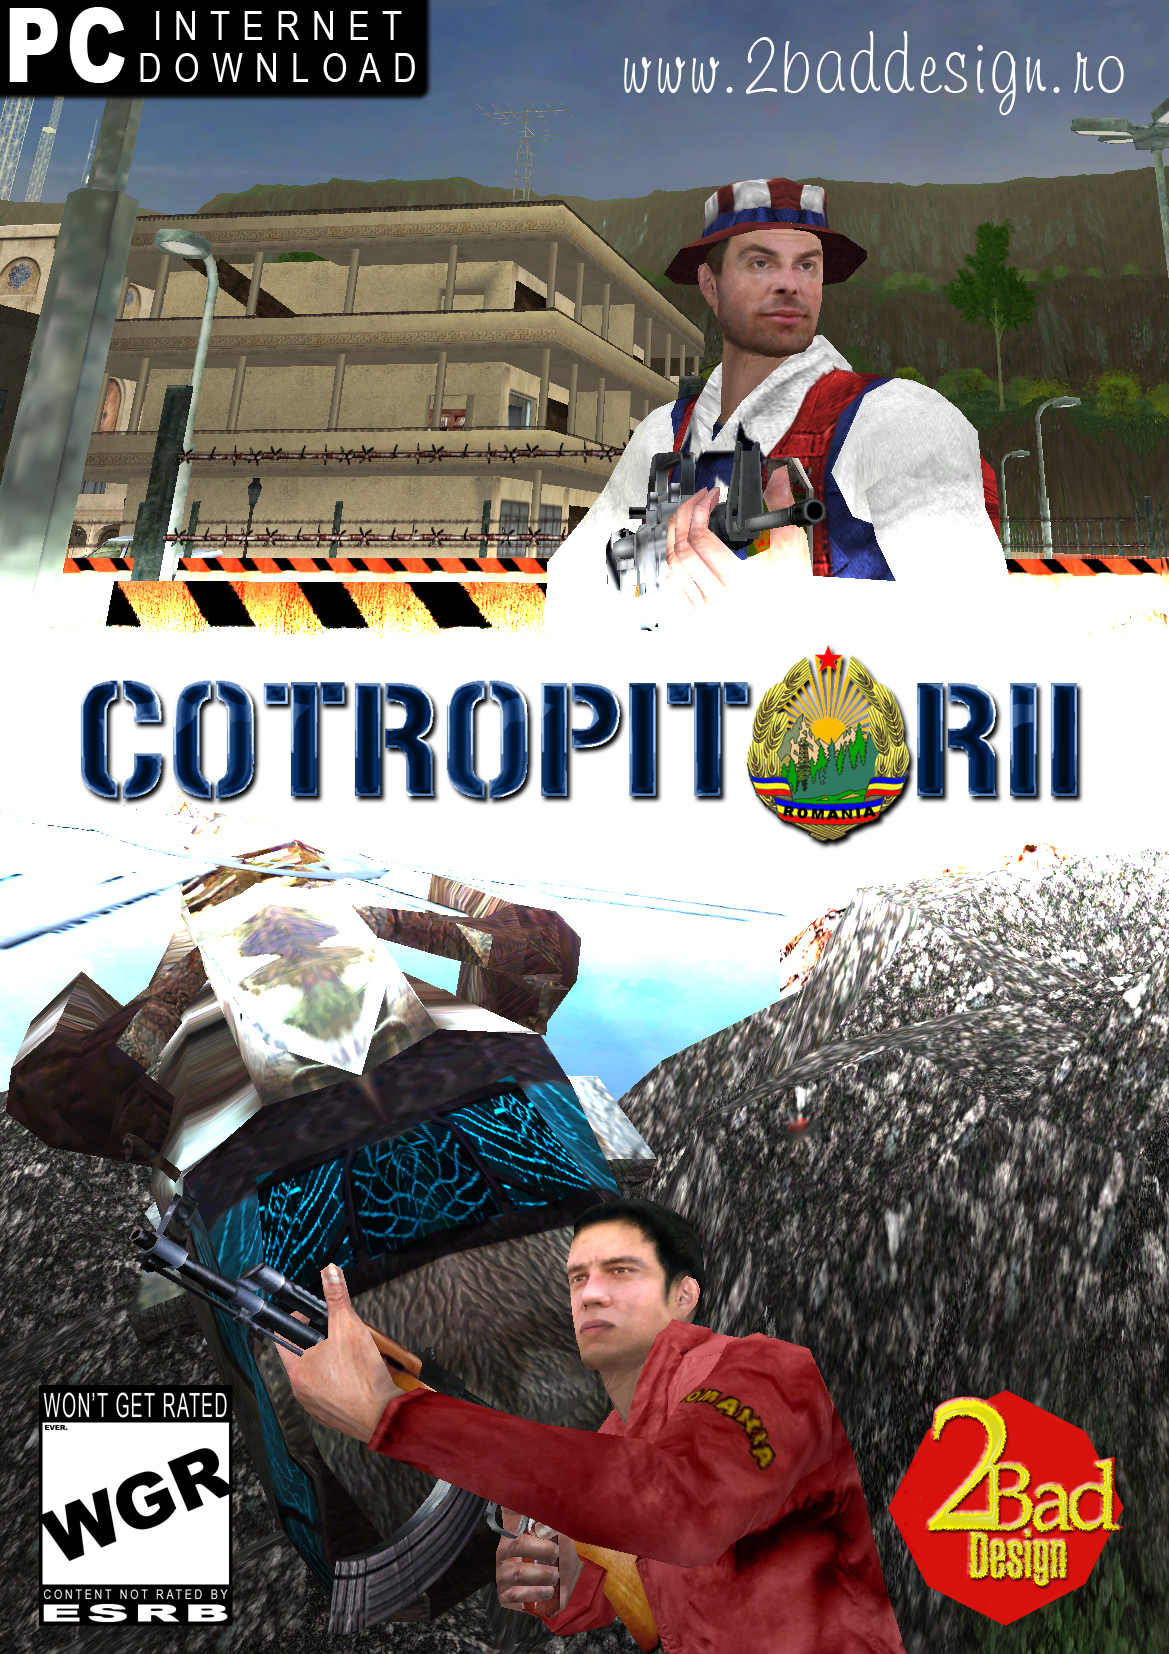 Cotropitorii Poster and game box art.